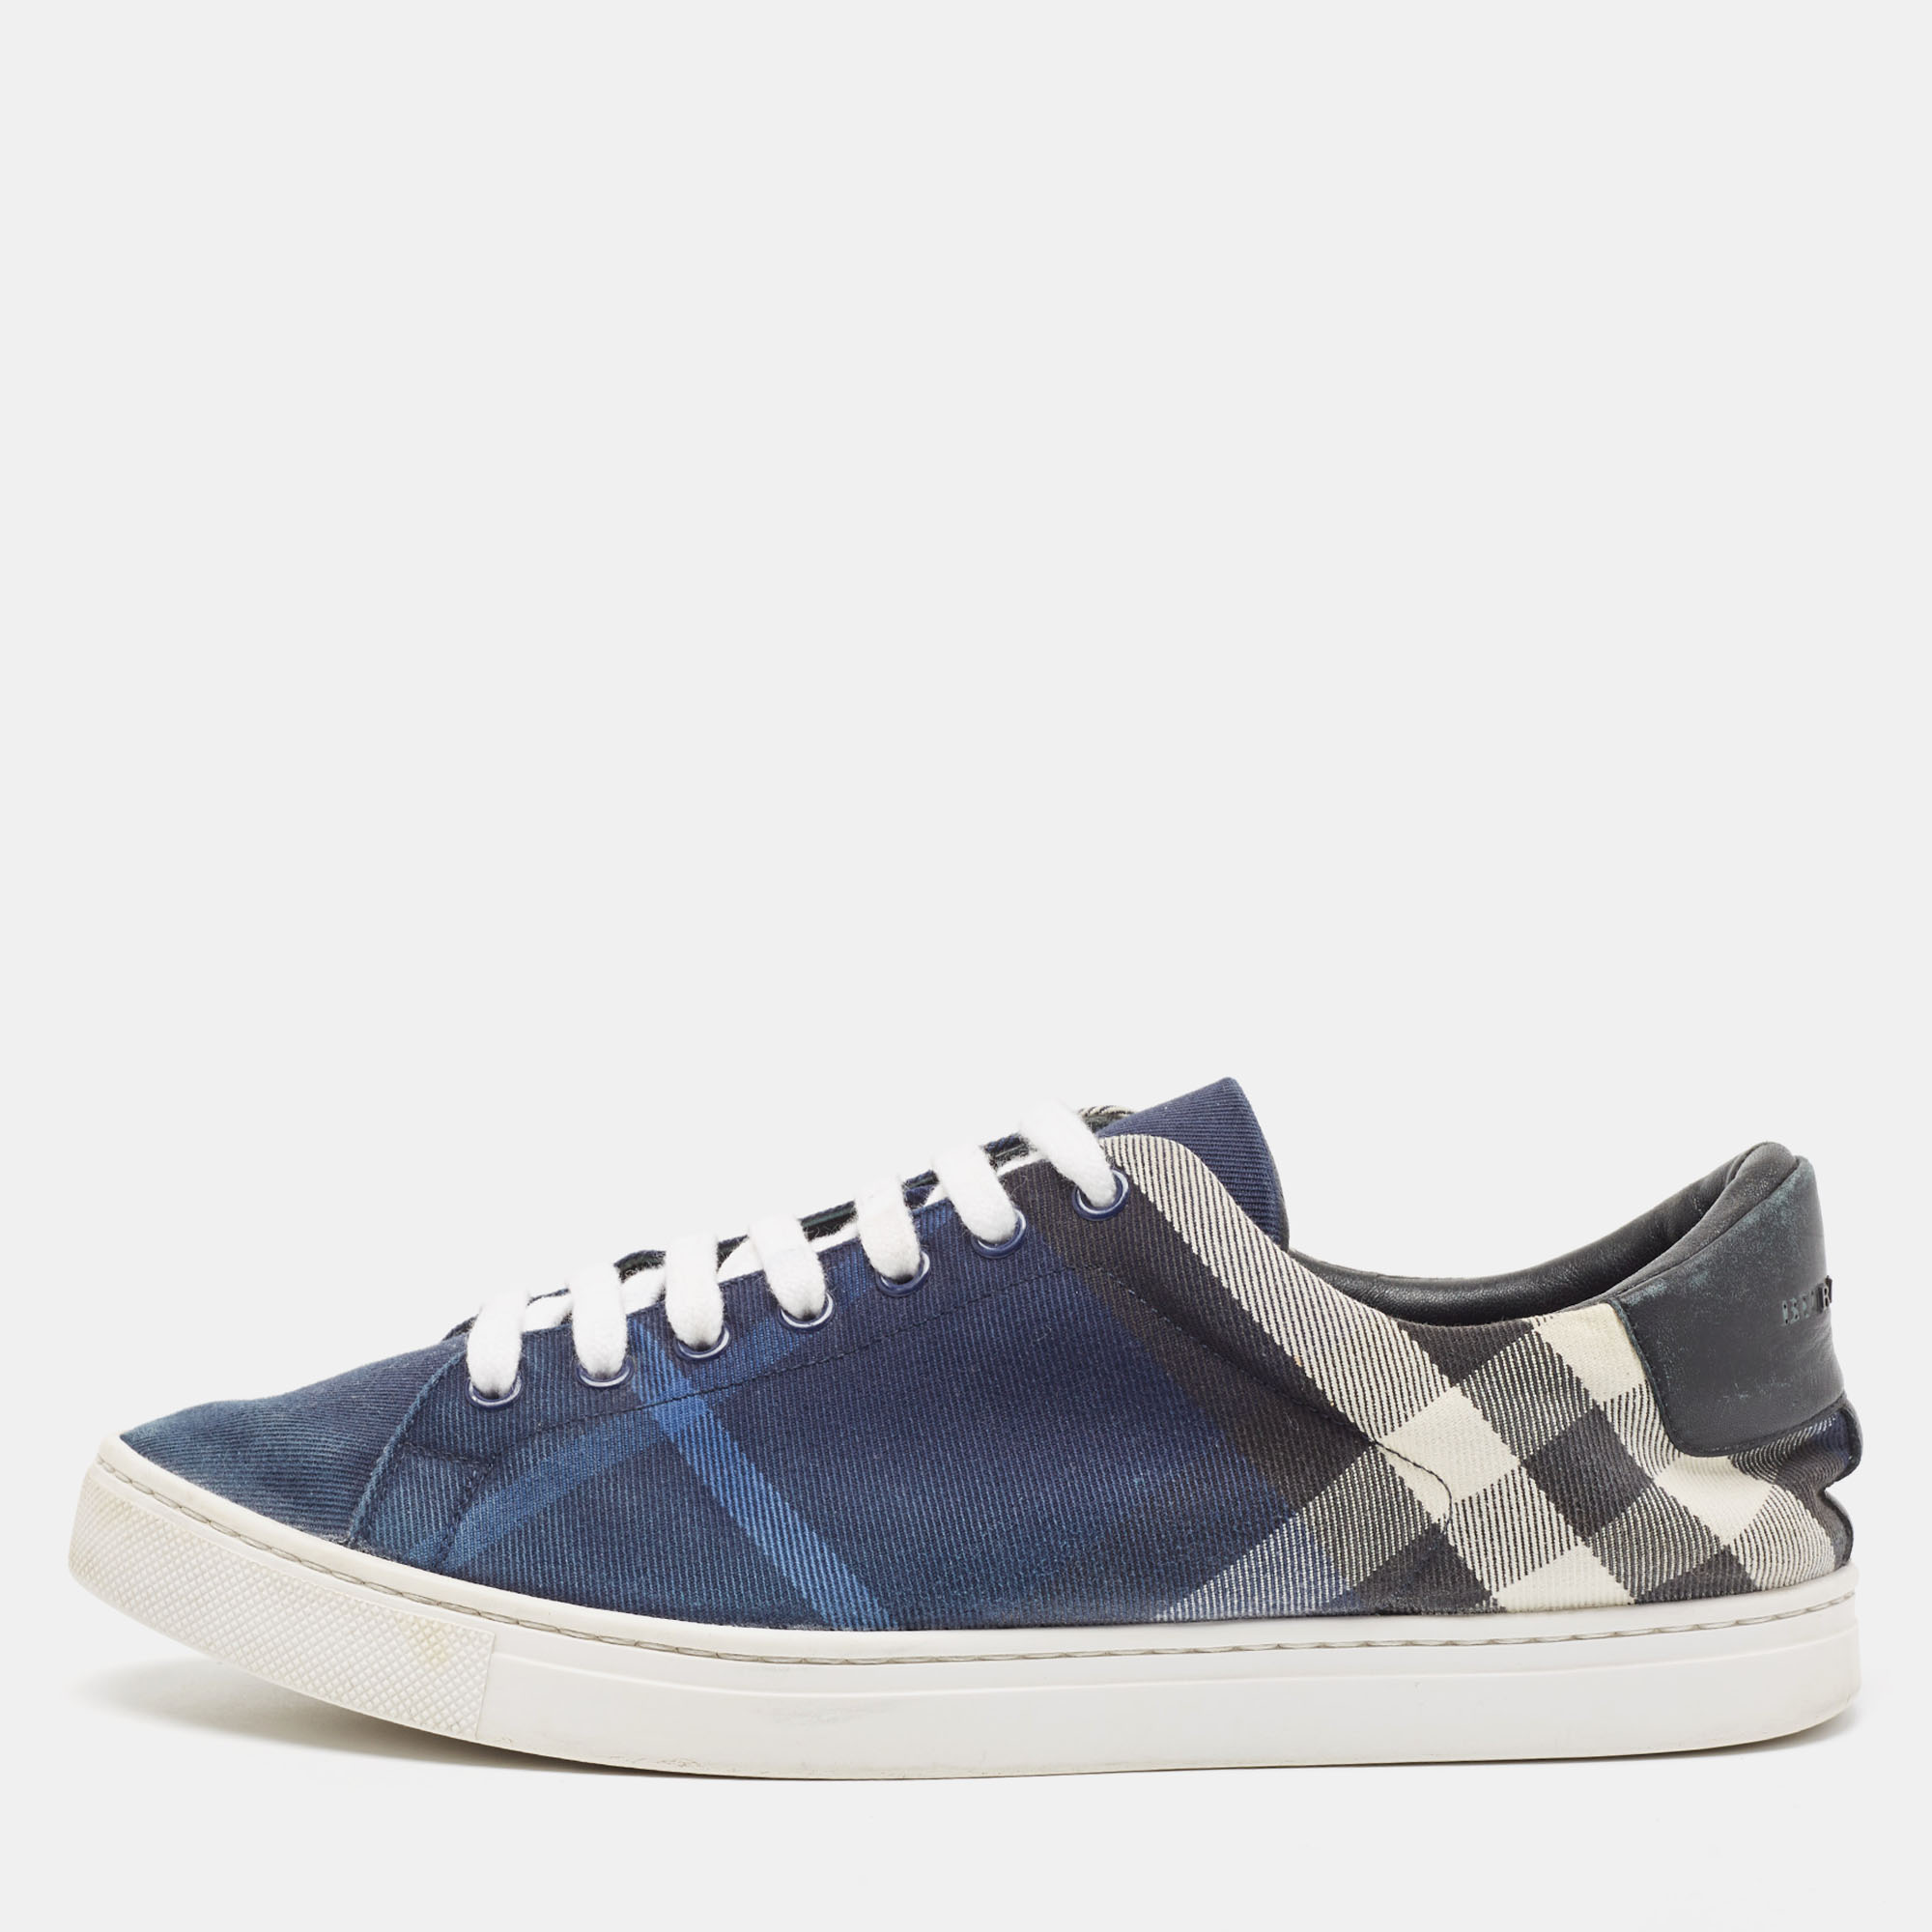 Burberry blue/white nova check denim and leather low top sneakers size 44